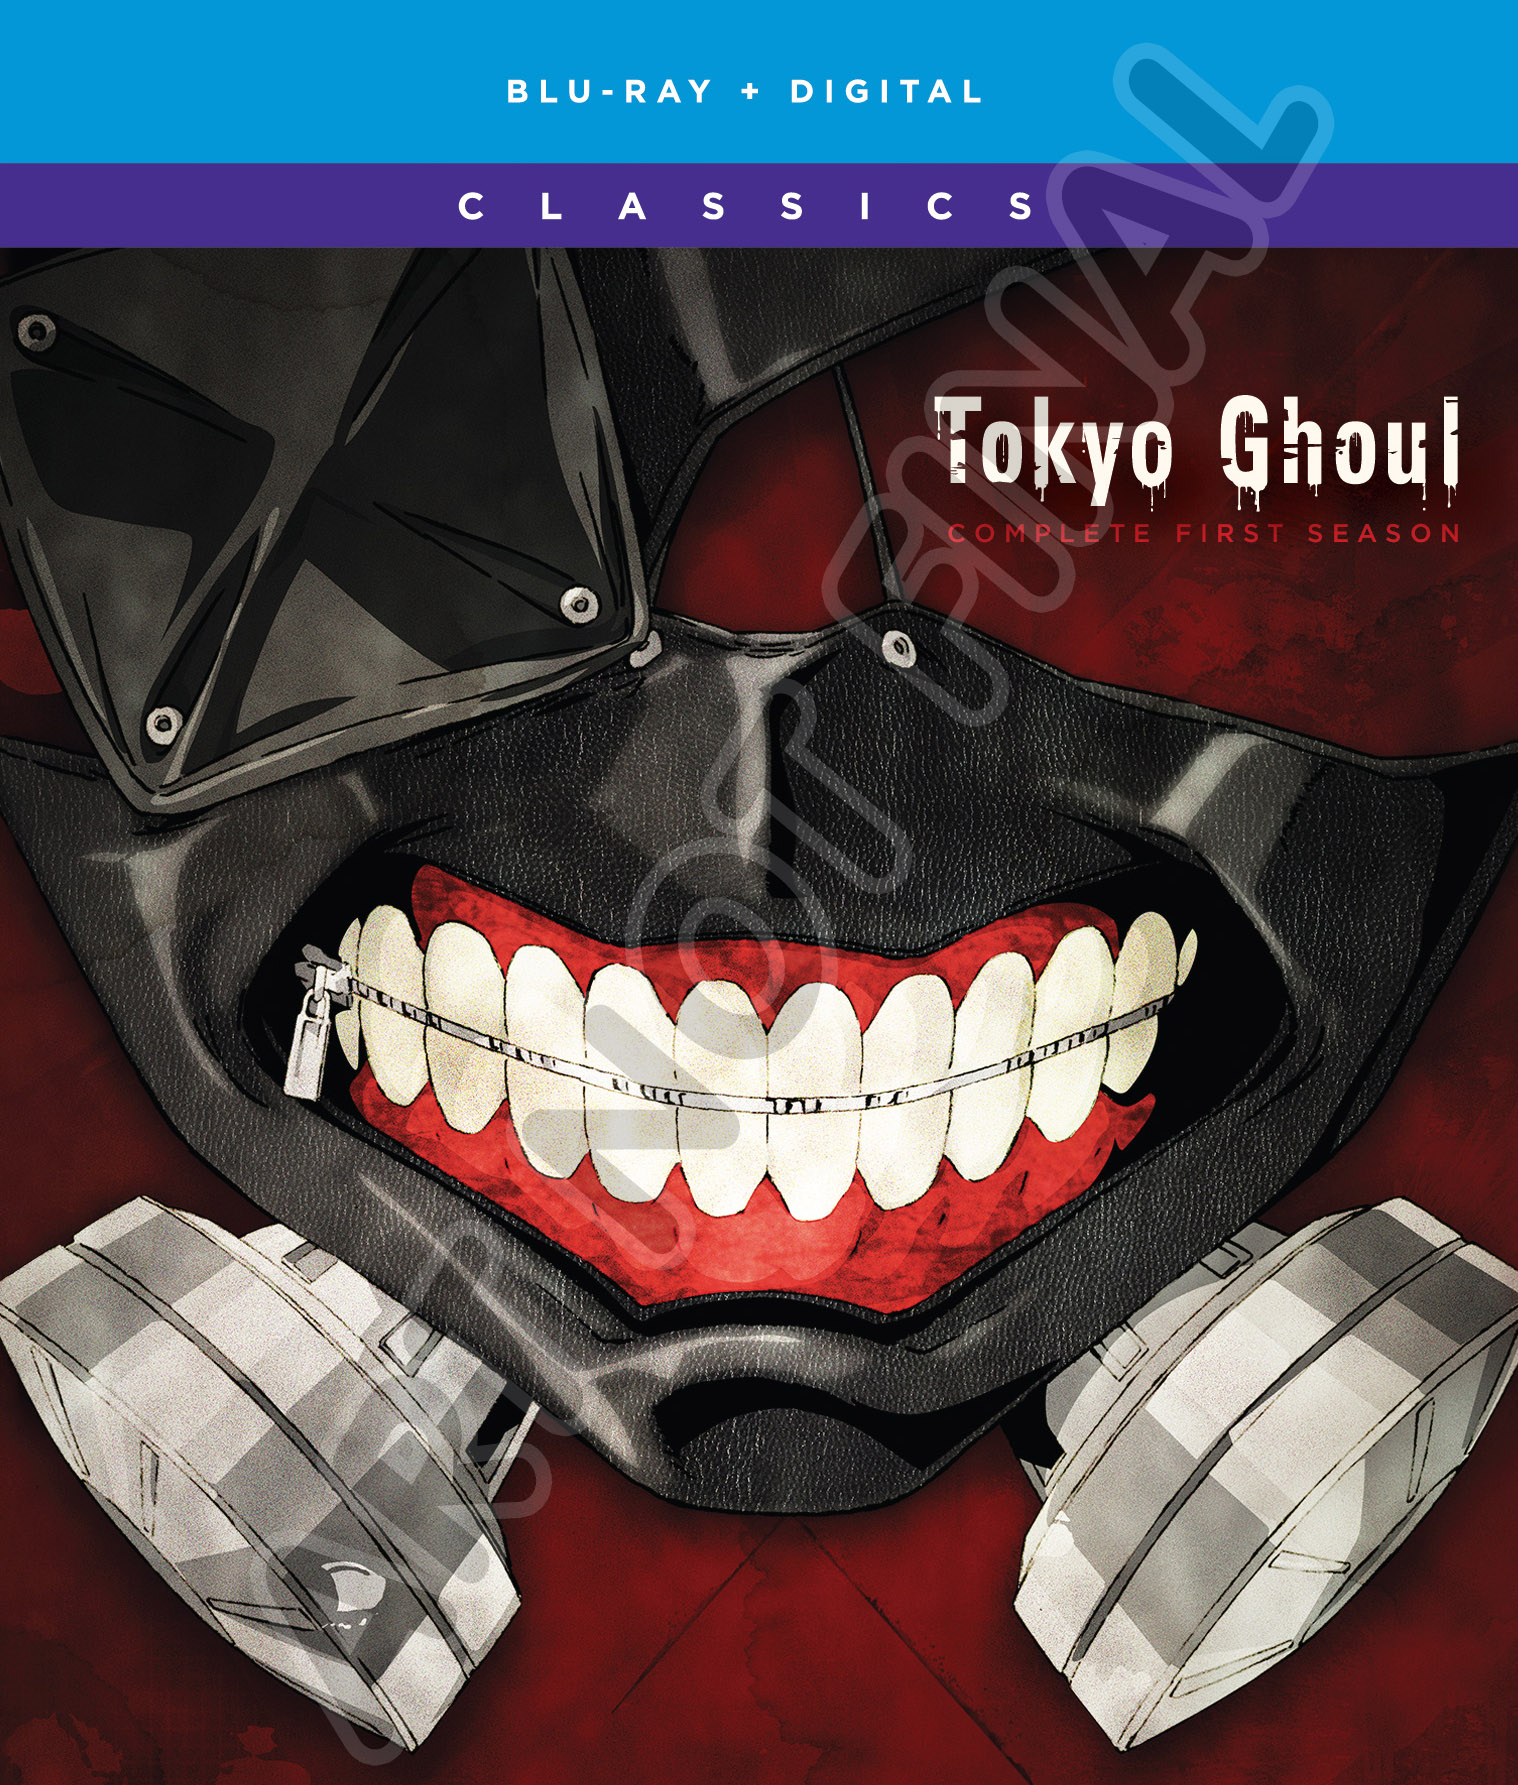 Tokyo Ghoul: The Complete First Season [Blu-ray] - Best Buy